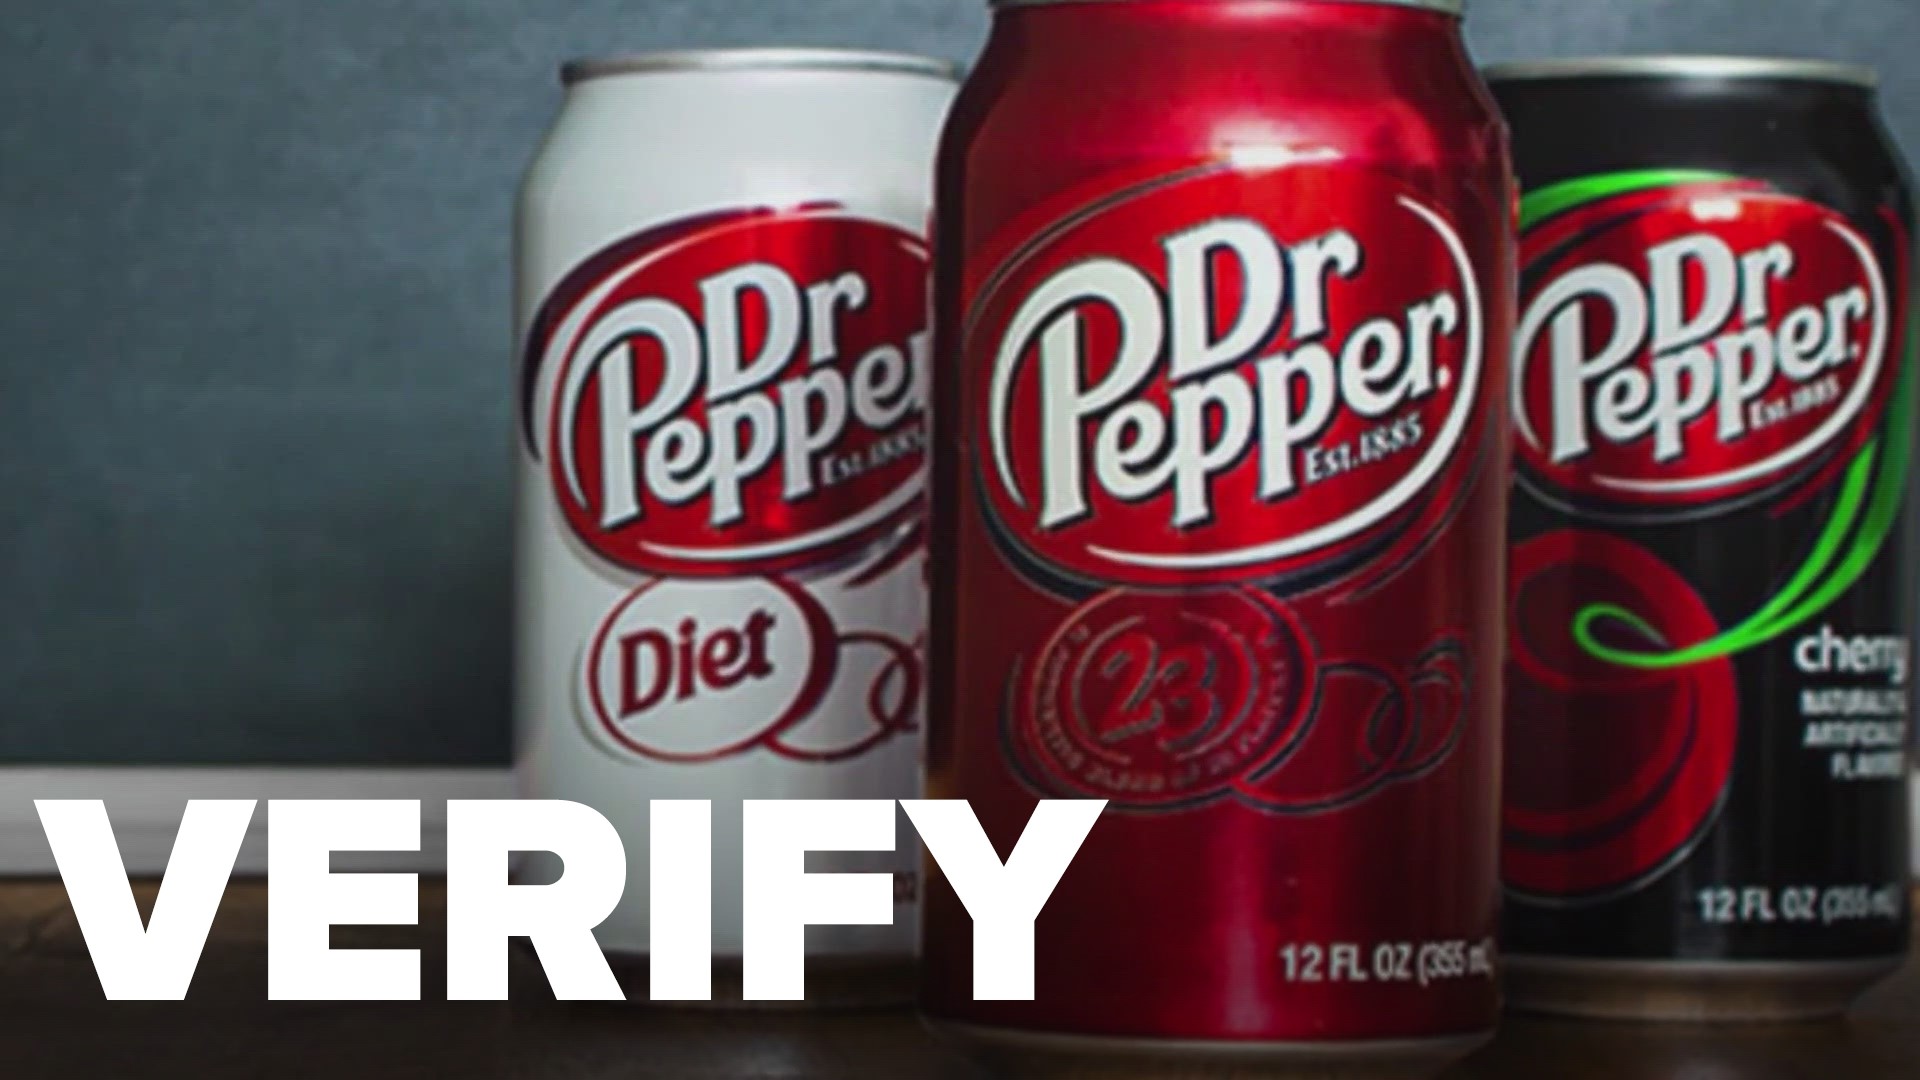 Rumors have been swirling on social media that the popular soda Dr. Pepper is being discontinued. The company stated that there's no need to worry though.